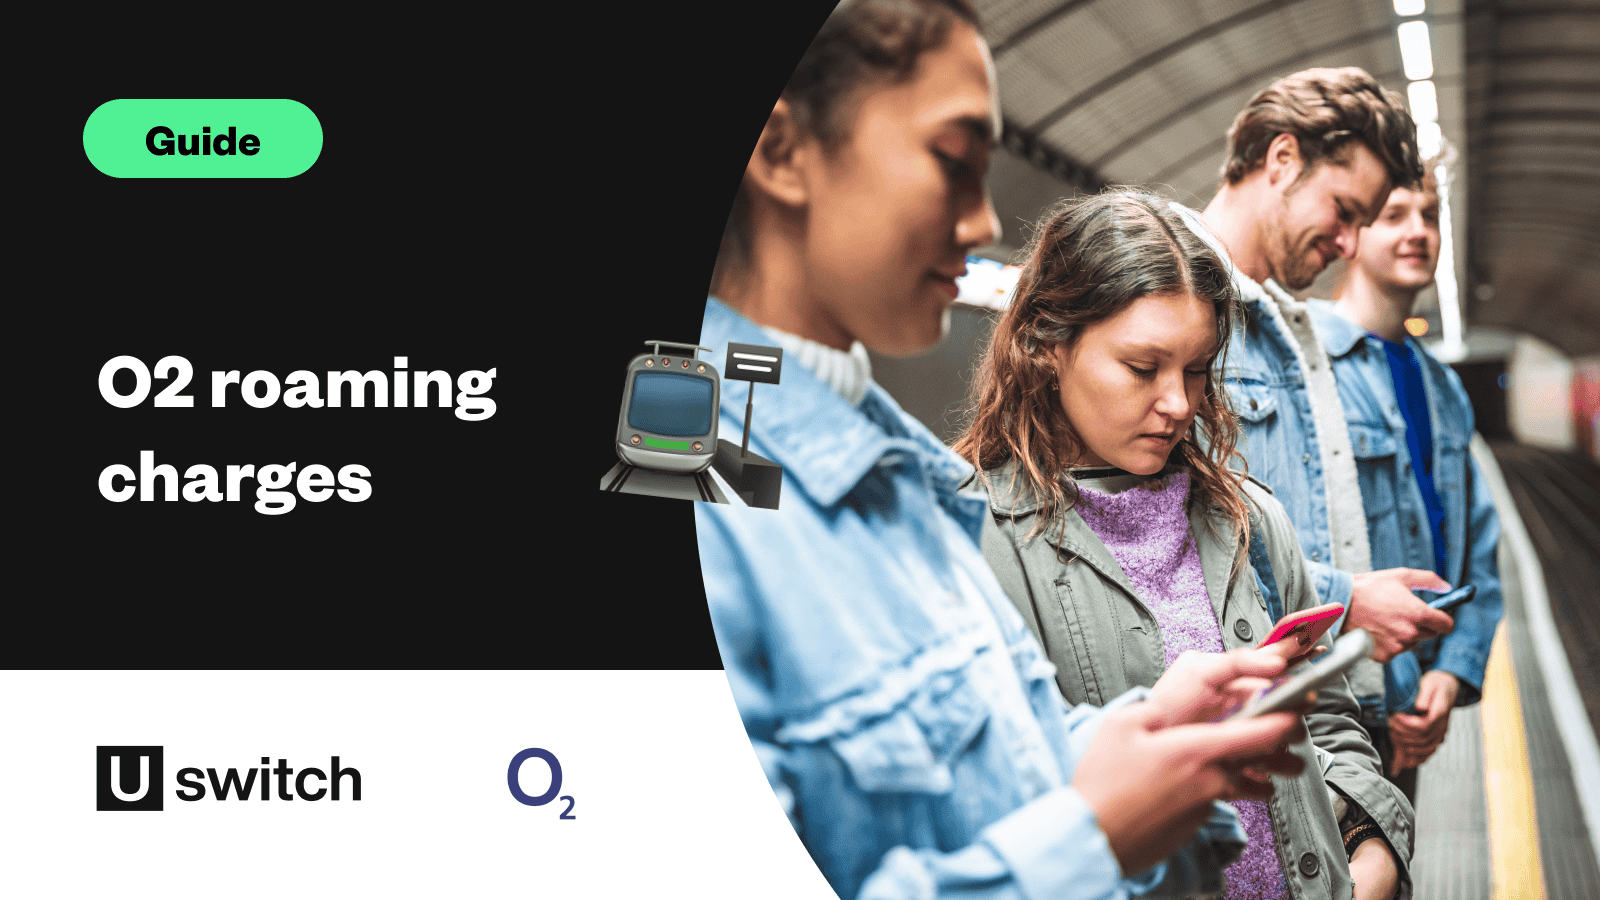 O2 roaming charges guide - young people waiting for a train